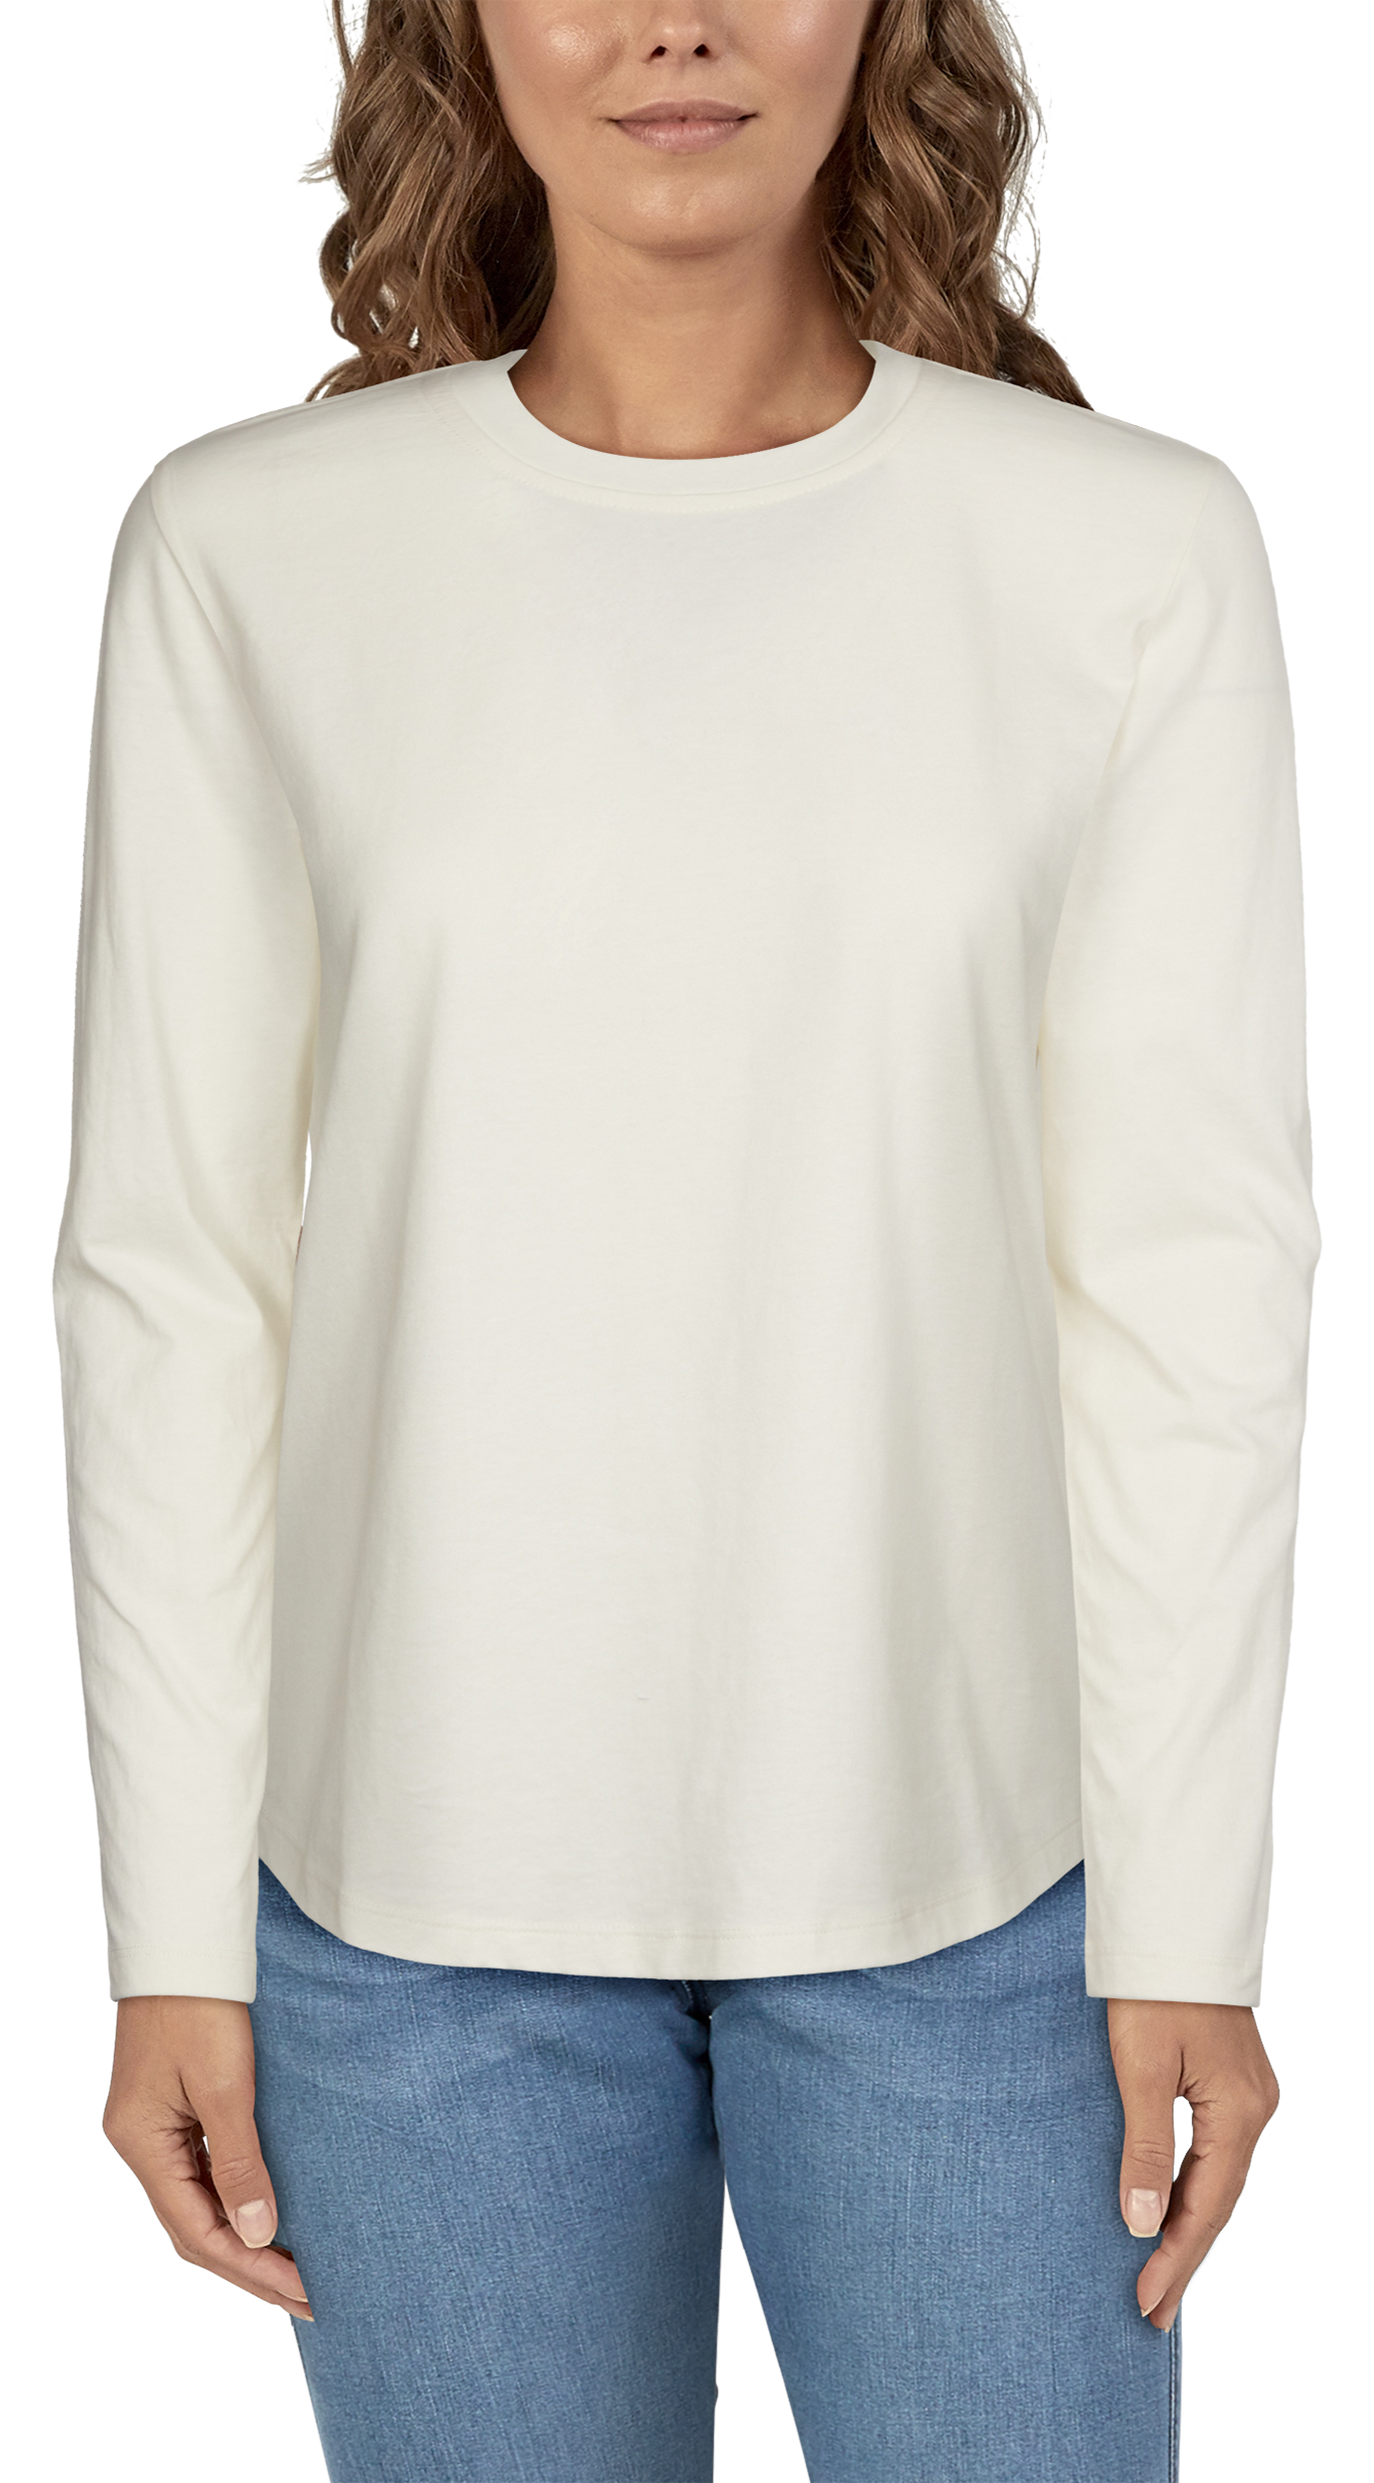 Natural Reflections Everyday Crew Long-Sleeve Shirt for Ladies - Baked Clay - 2x